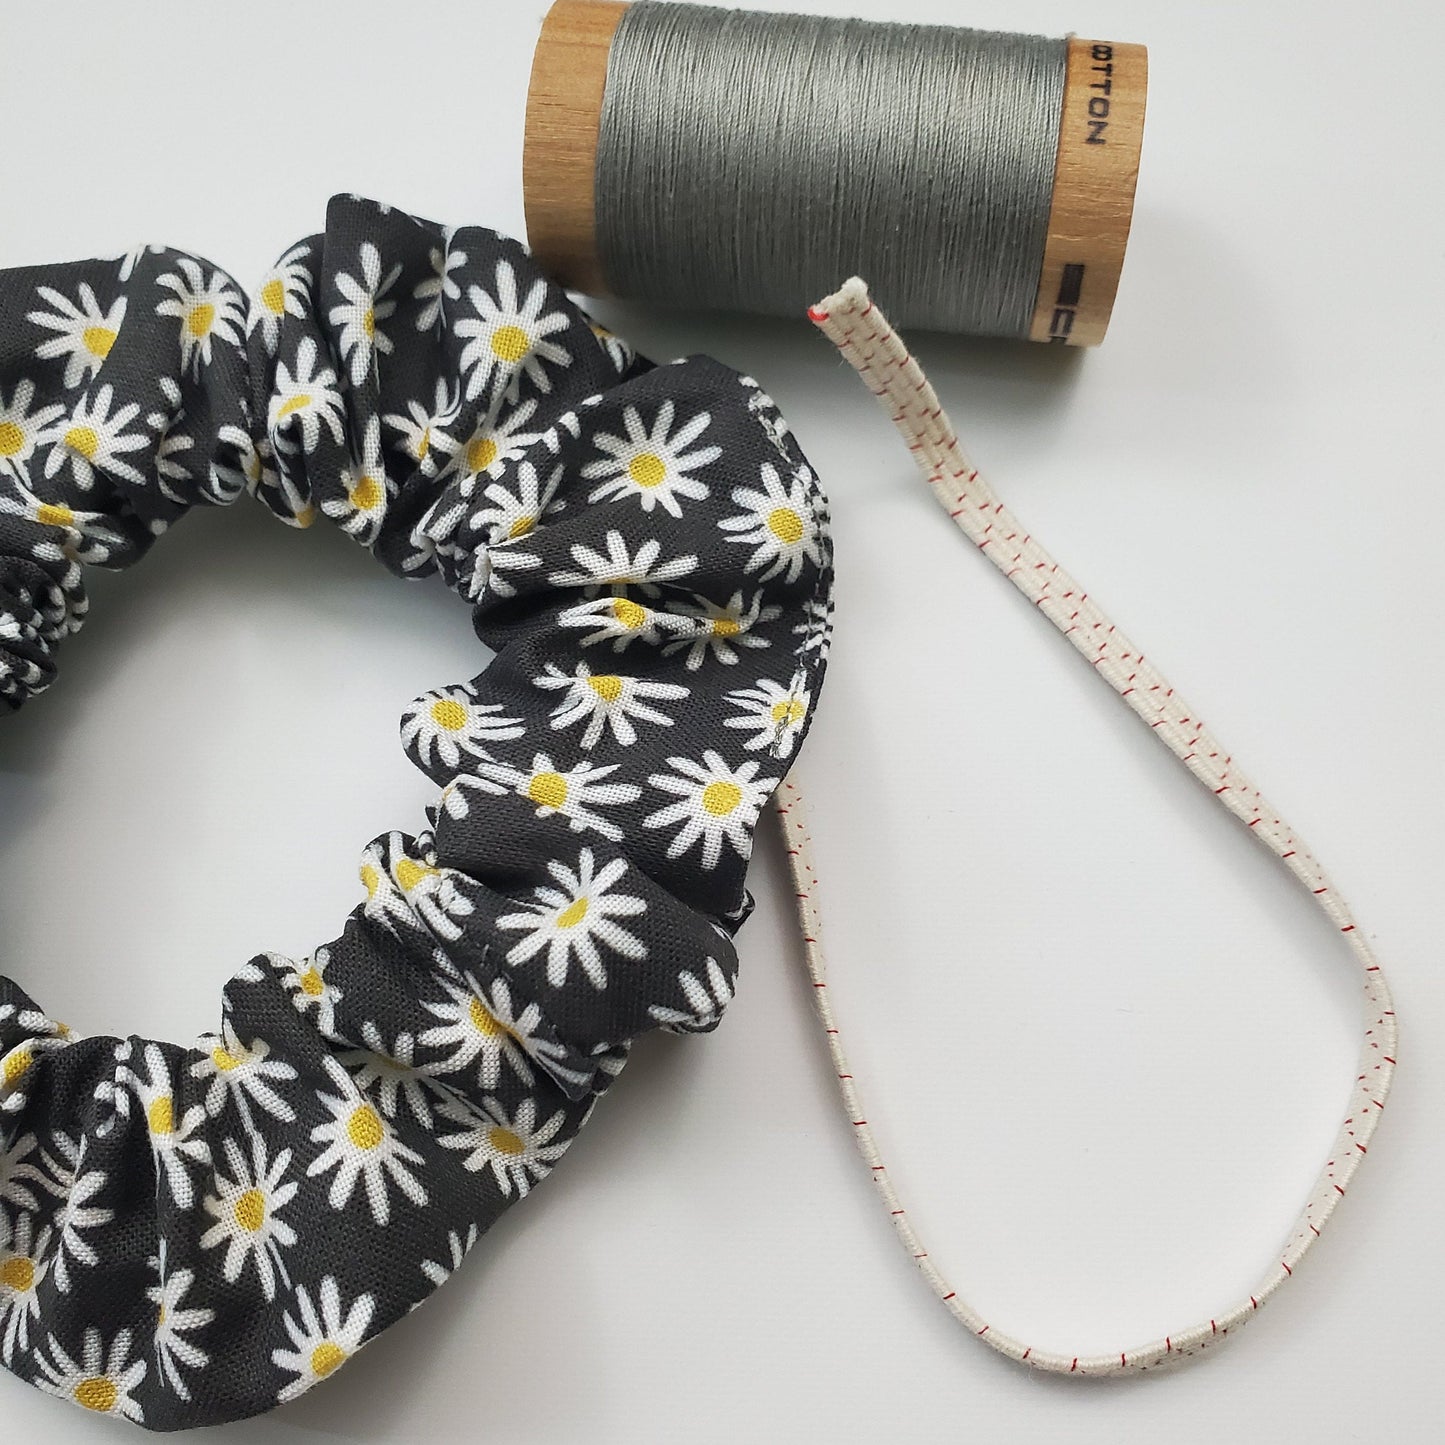 Scrunchie shown next to a wooden spool of grey thread, and a piece of the biodegradable elastic.